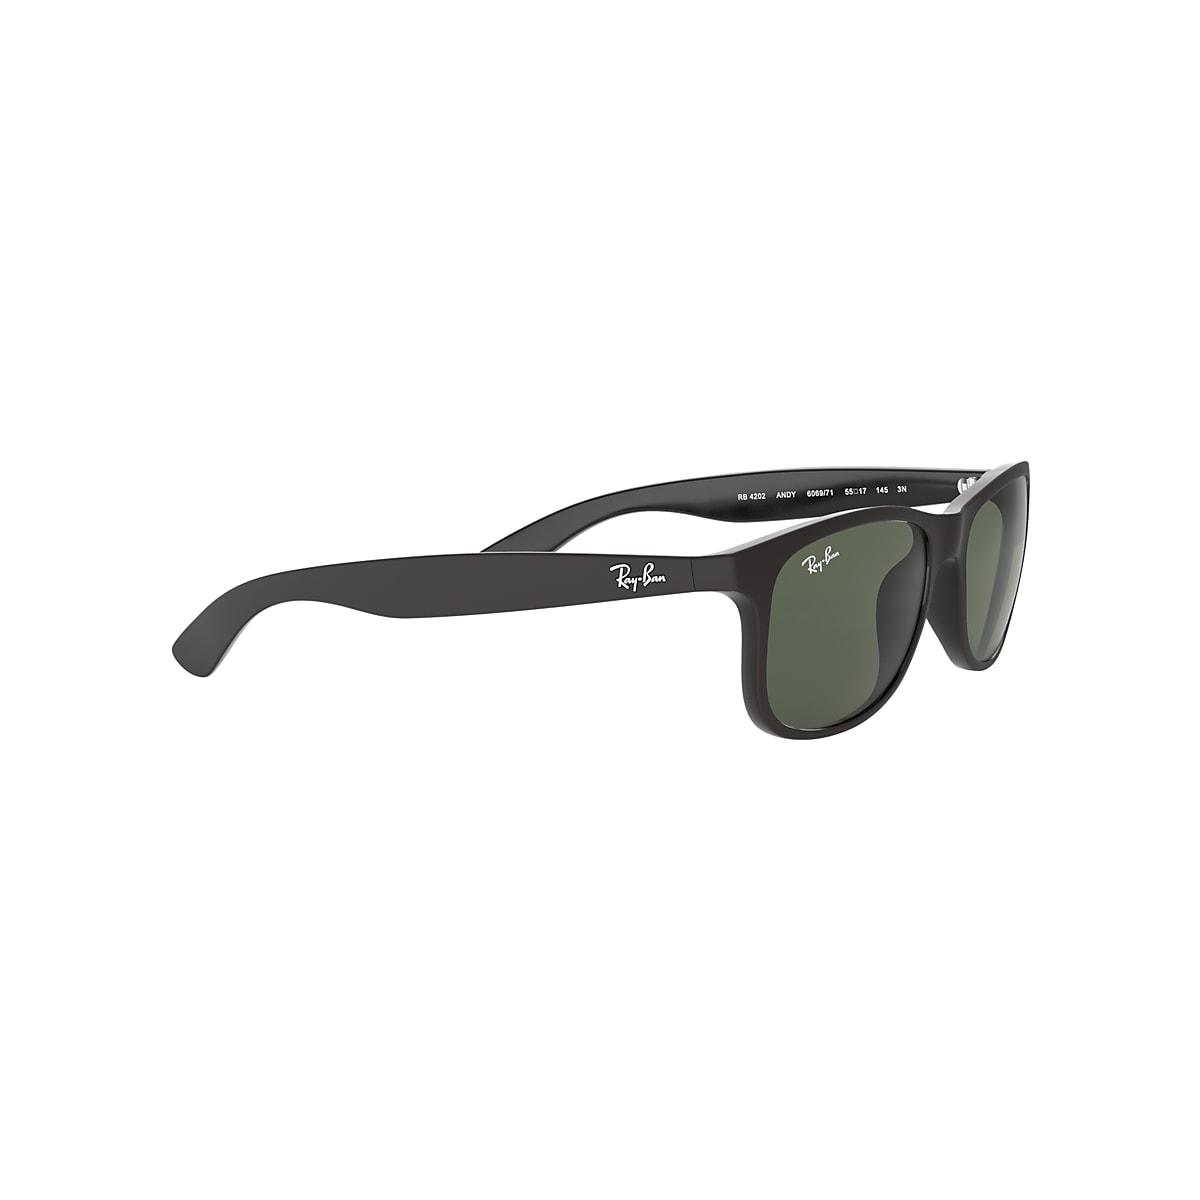 ANDY Sunglasses in Black and Green - RB4202 | Ray-Ban® CA